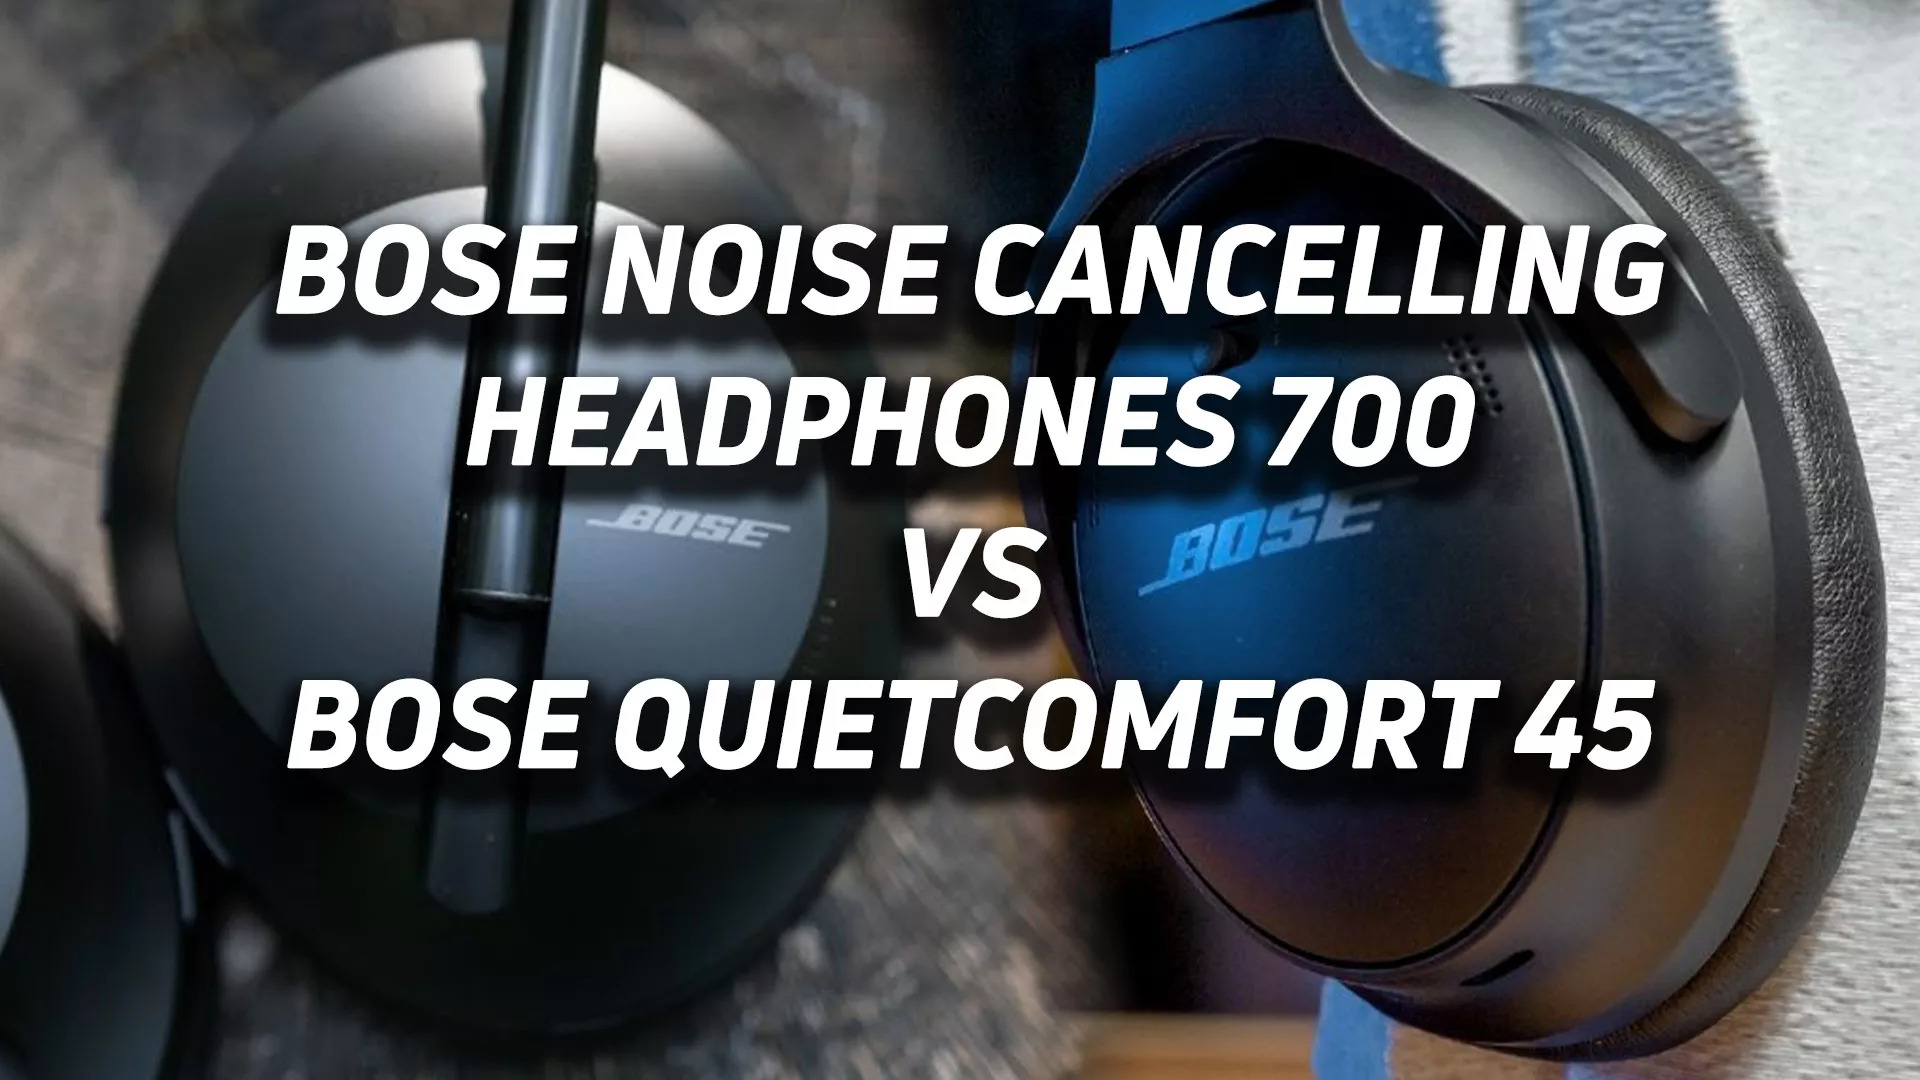 Text reading 'Bose Noise Cancelling Headphones 700 vs Bose Quietcomfort 45' overlaid on top of an ear cup of those two models of headphones arranged from left to right.